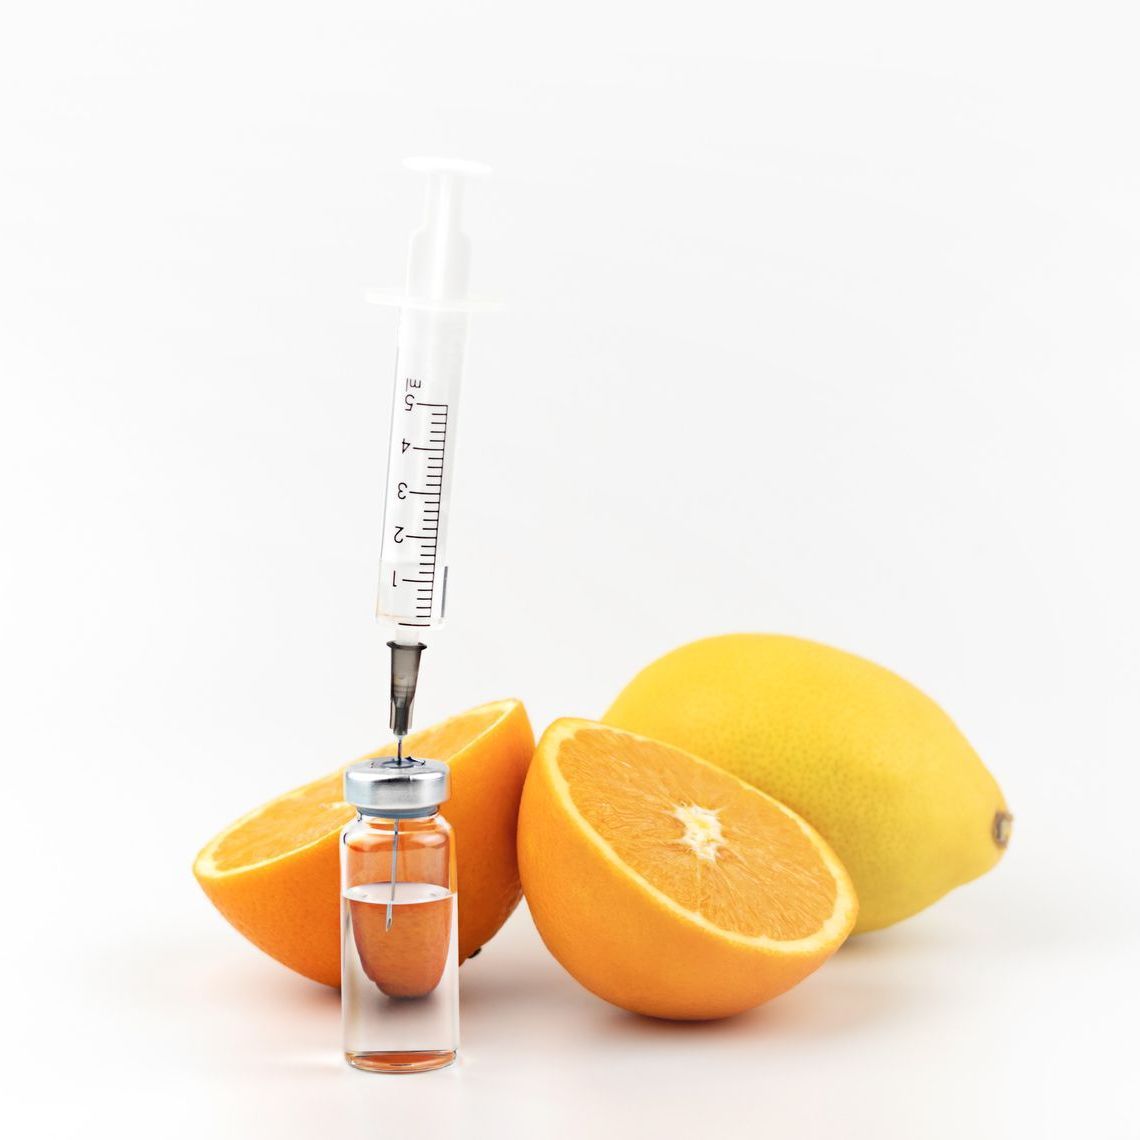 a syringe is being used to inject a bottle of orange juice